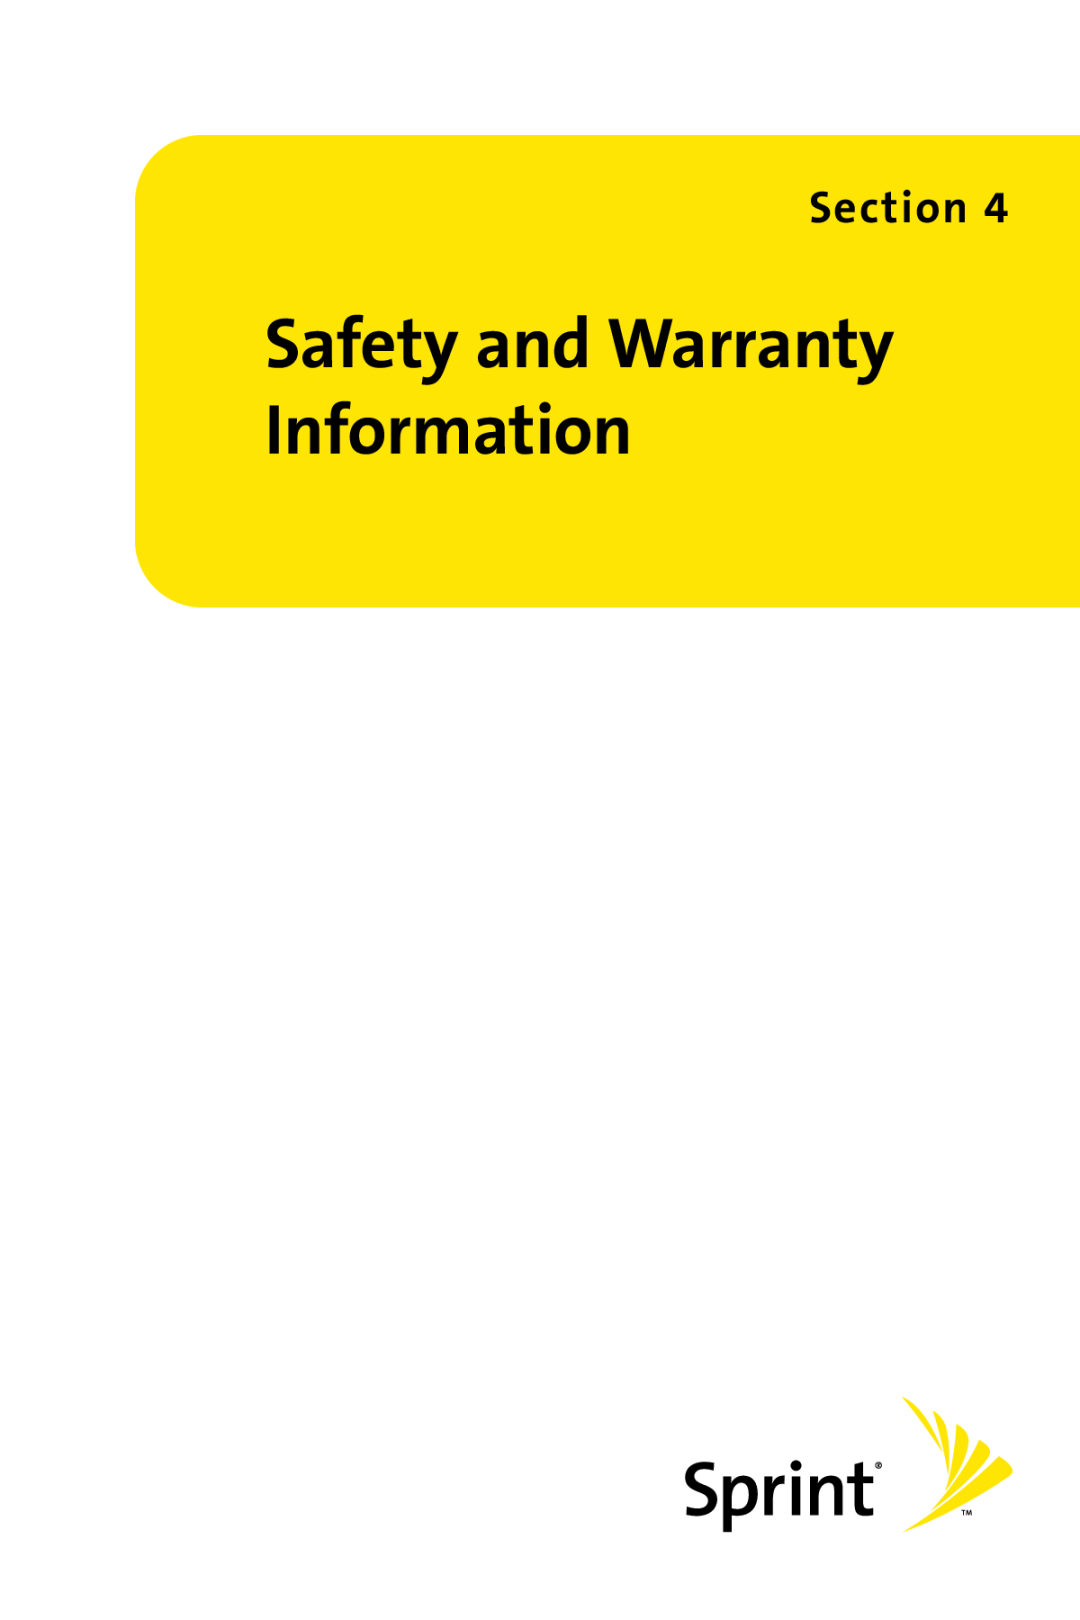 Sprint Nextel LX160 manual Safety and Warranty Information, Section 